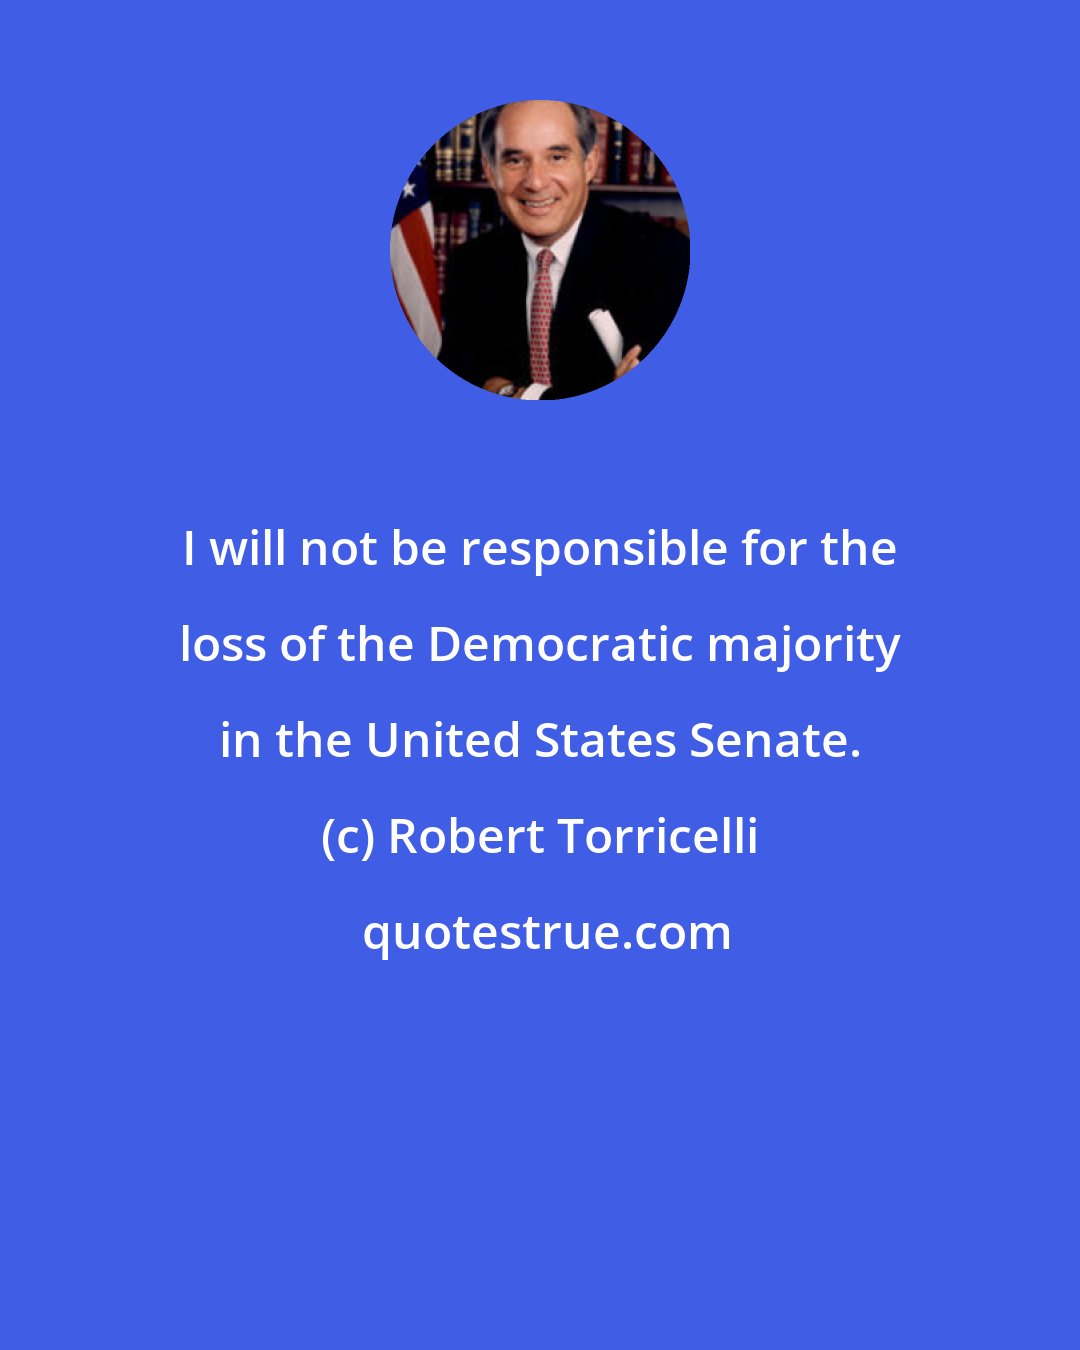 Robert Torricelli: I will not be responsible for the loss of the Democratic majority in the United States Senate.